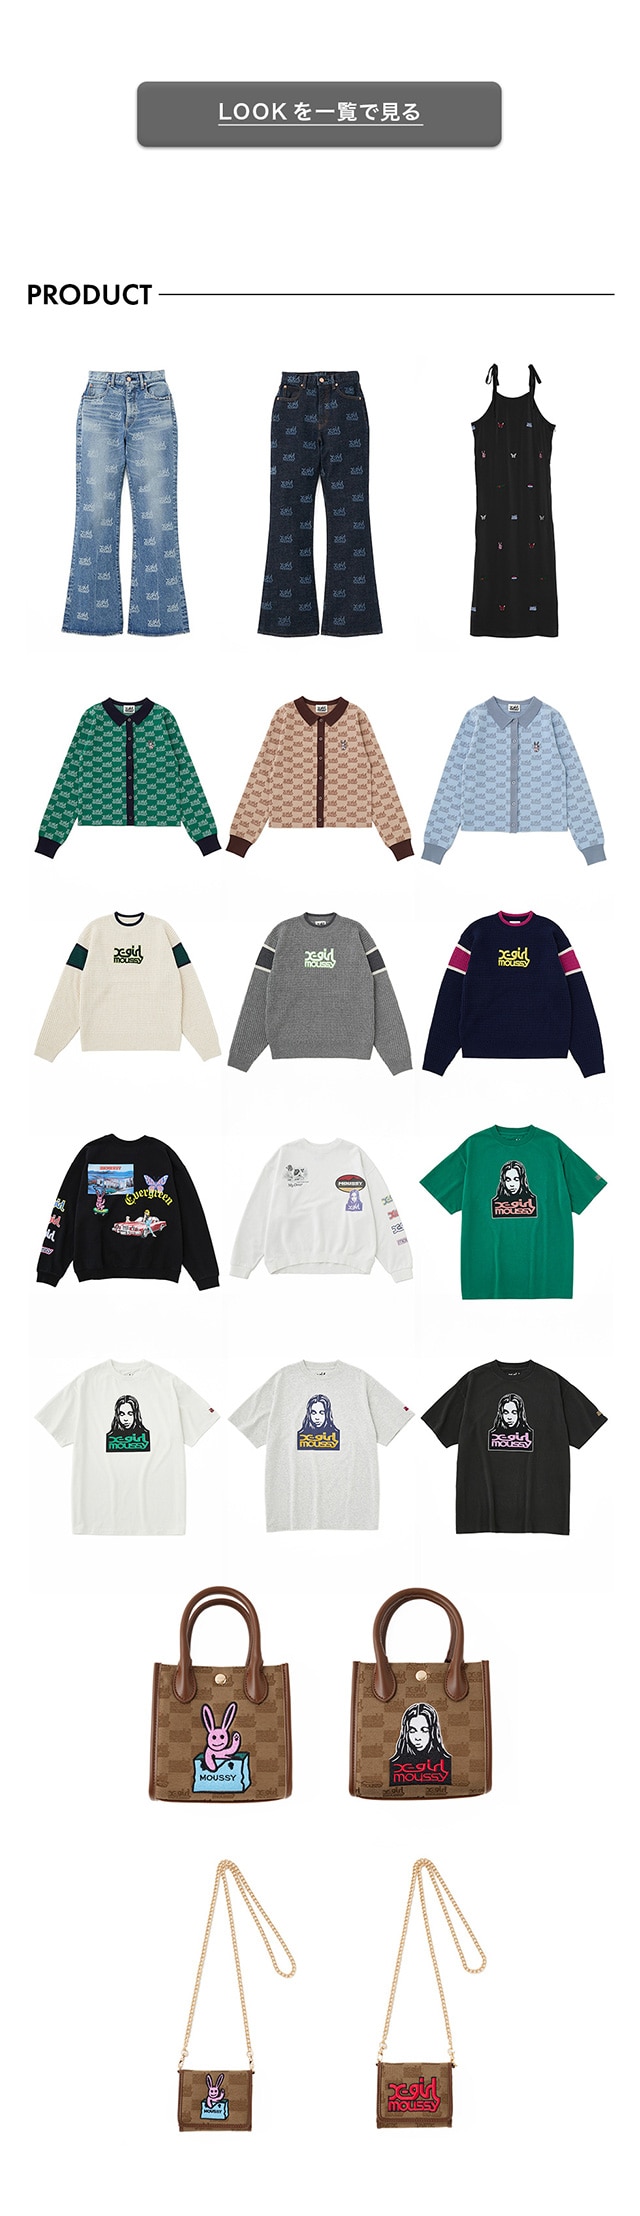 X-girl ｌ MOUSSY Special Collaboration】｜バロックジャパン 